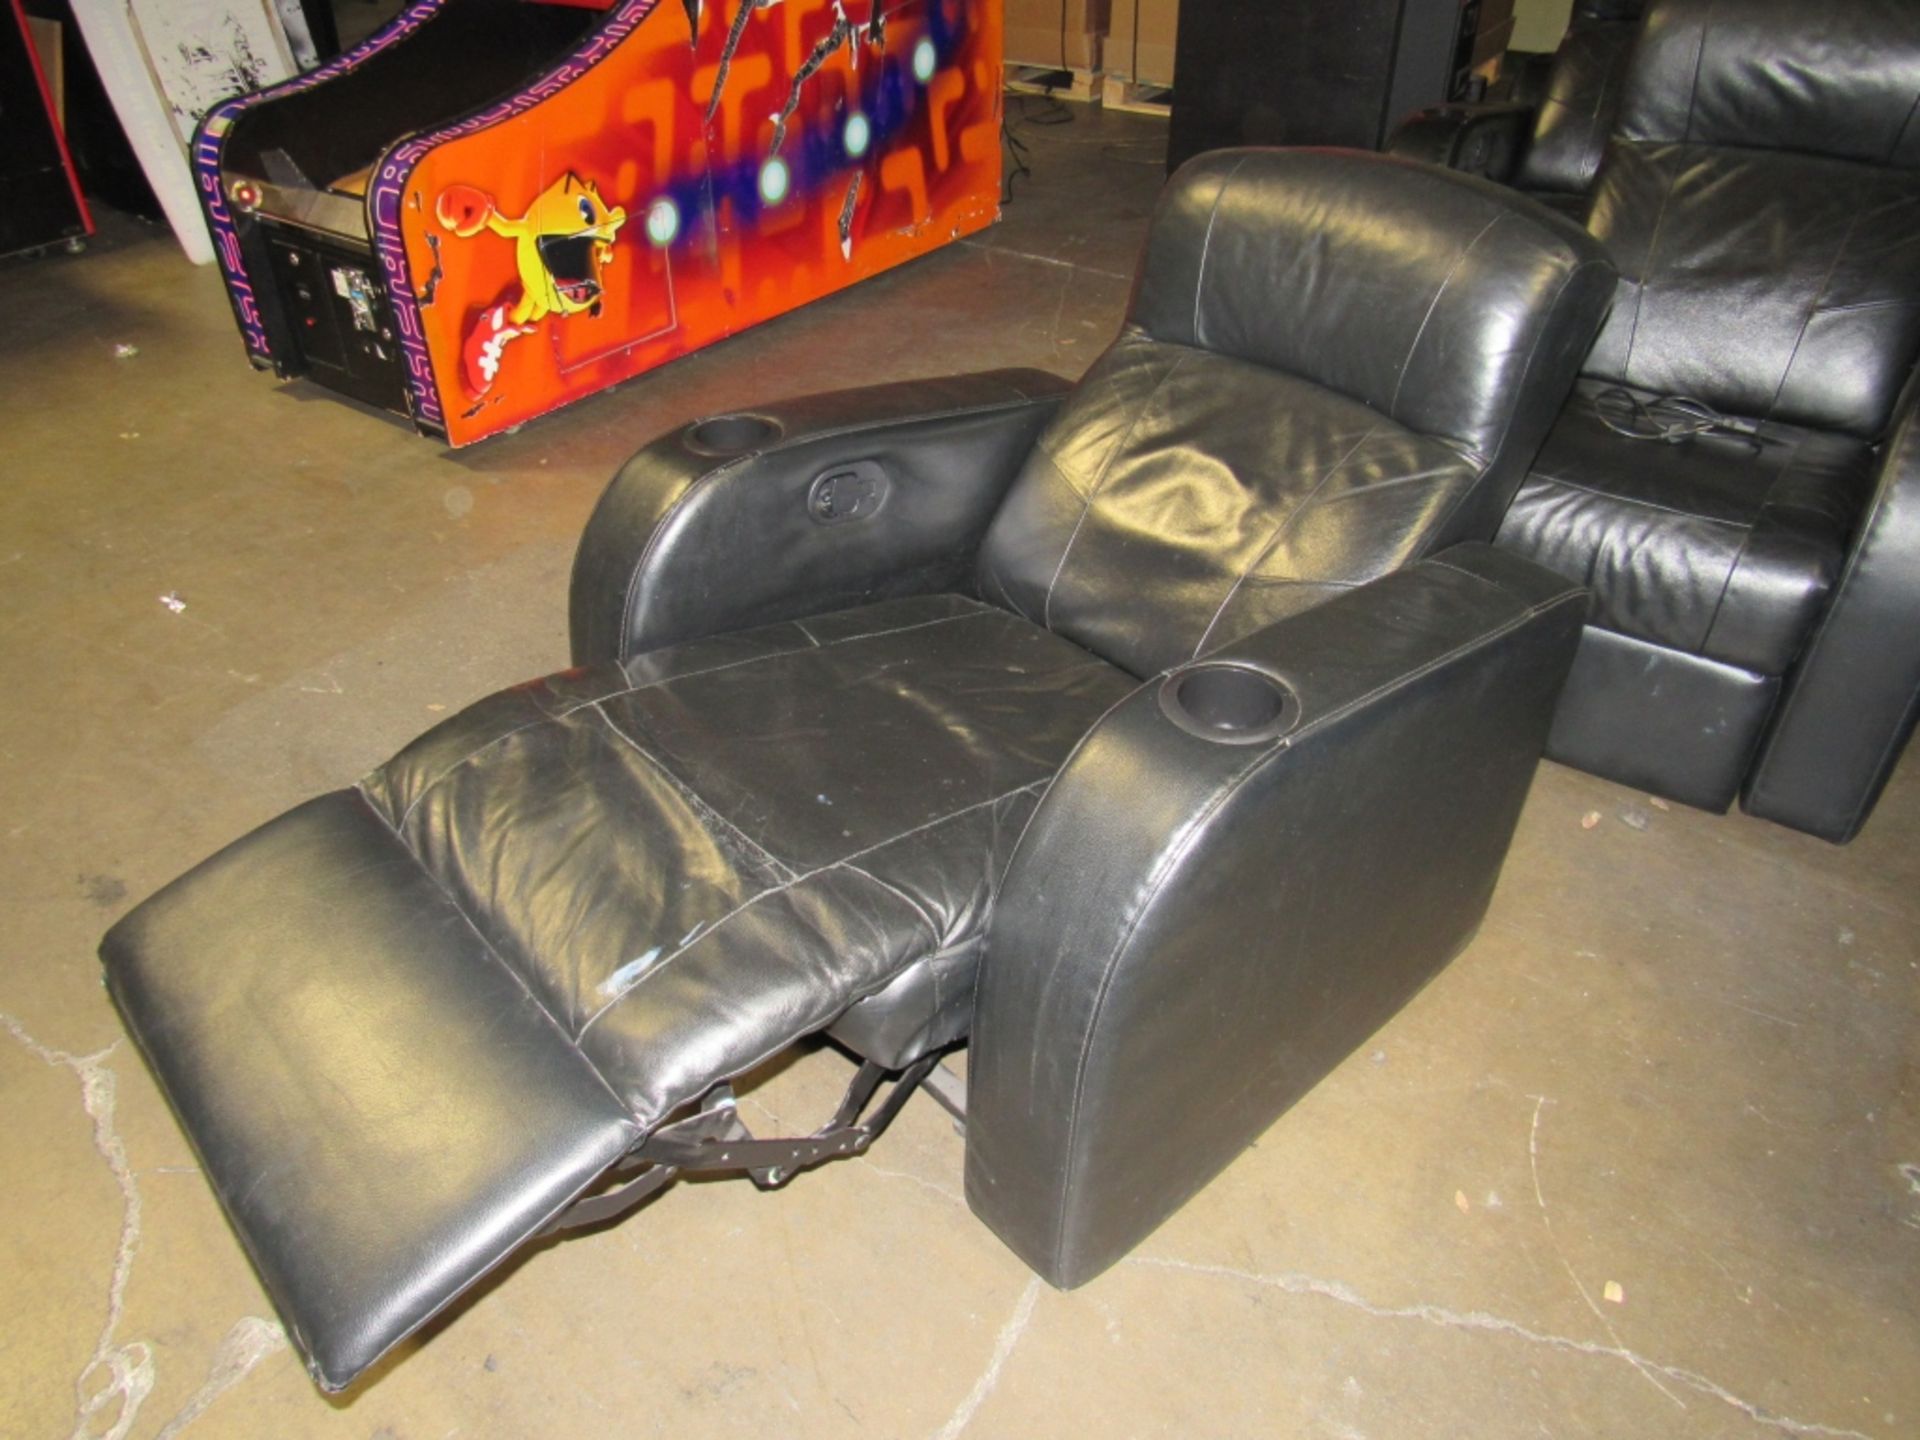 THEATER / GAMING RECLINER CHAIR W/ CUP HOLDERS